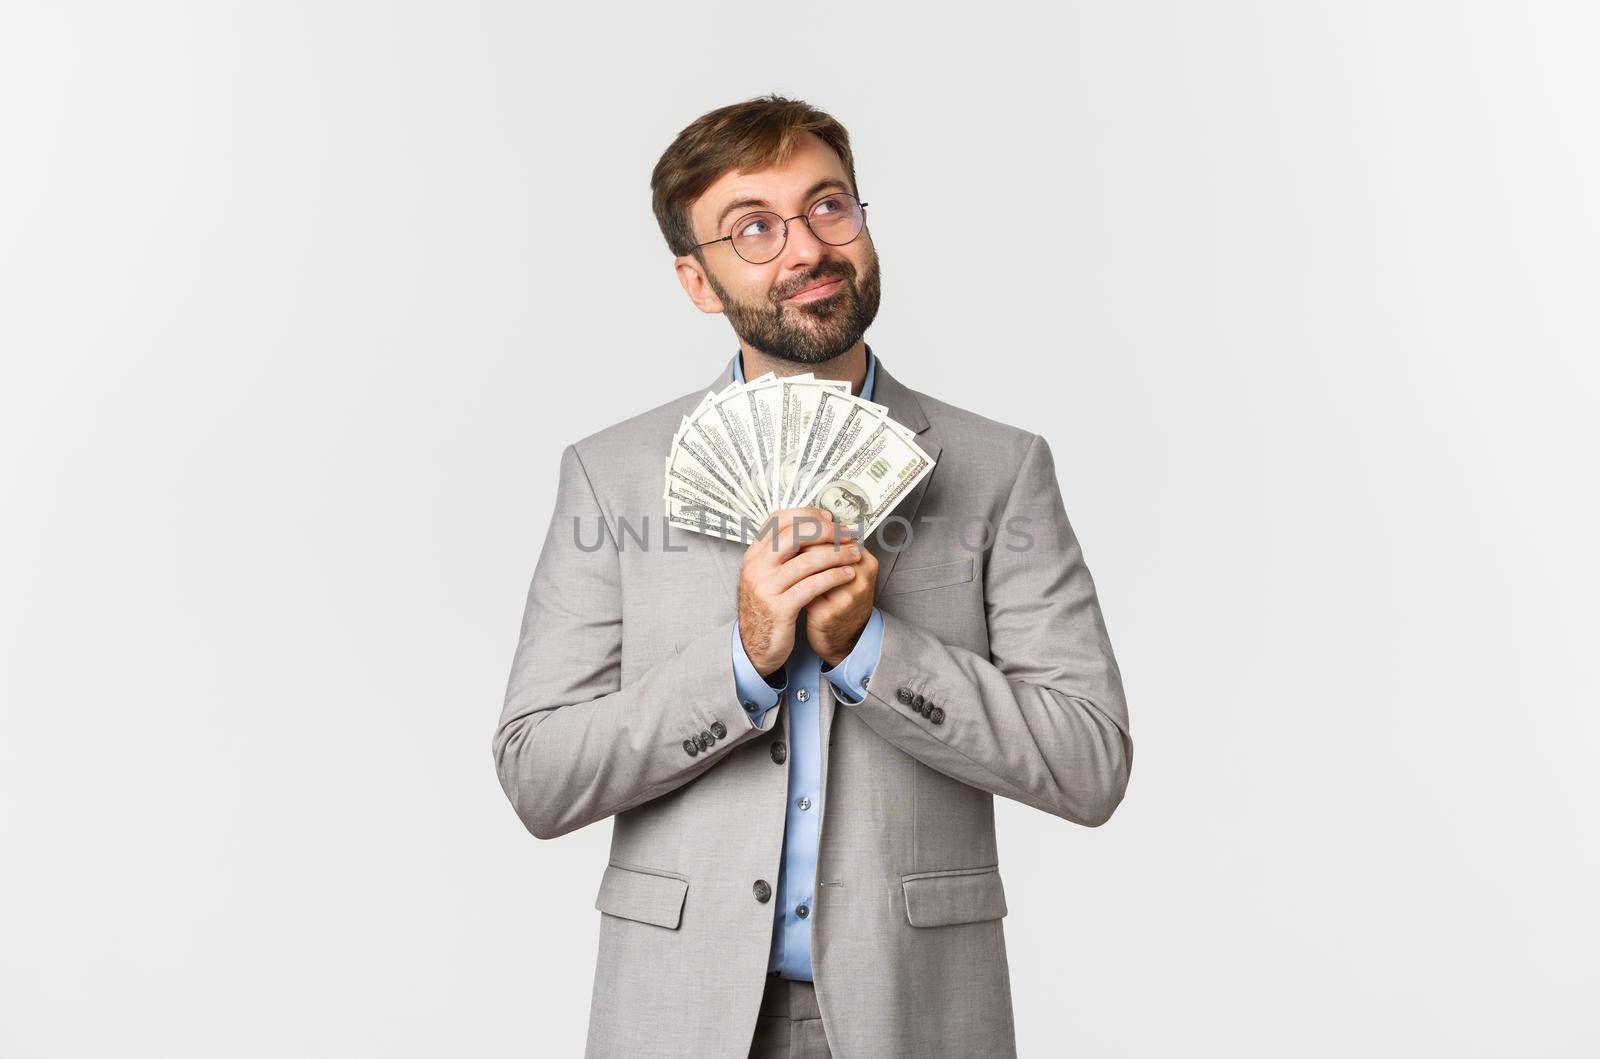 Image of happy businessman with beard, wearing grey suit and glasses, holding money and thinking about shopping or investing, standing over white background.